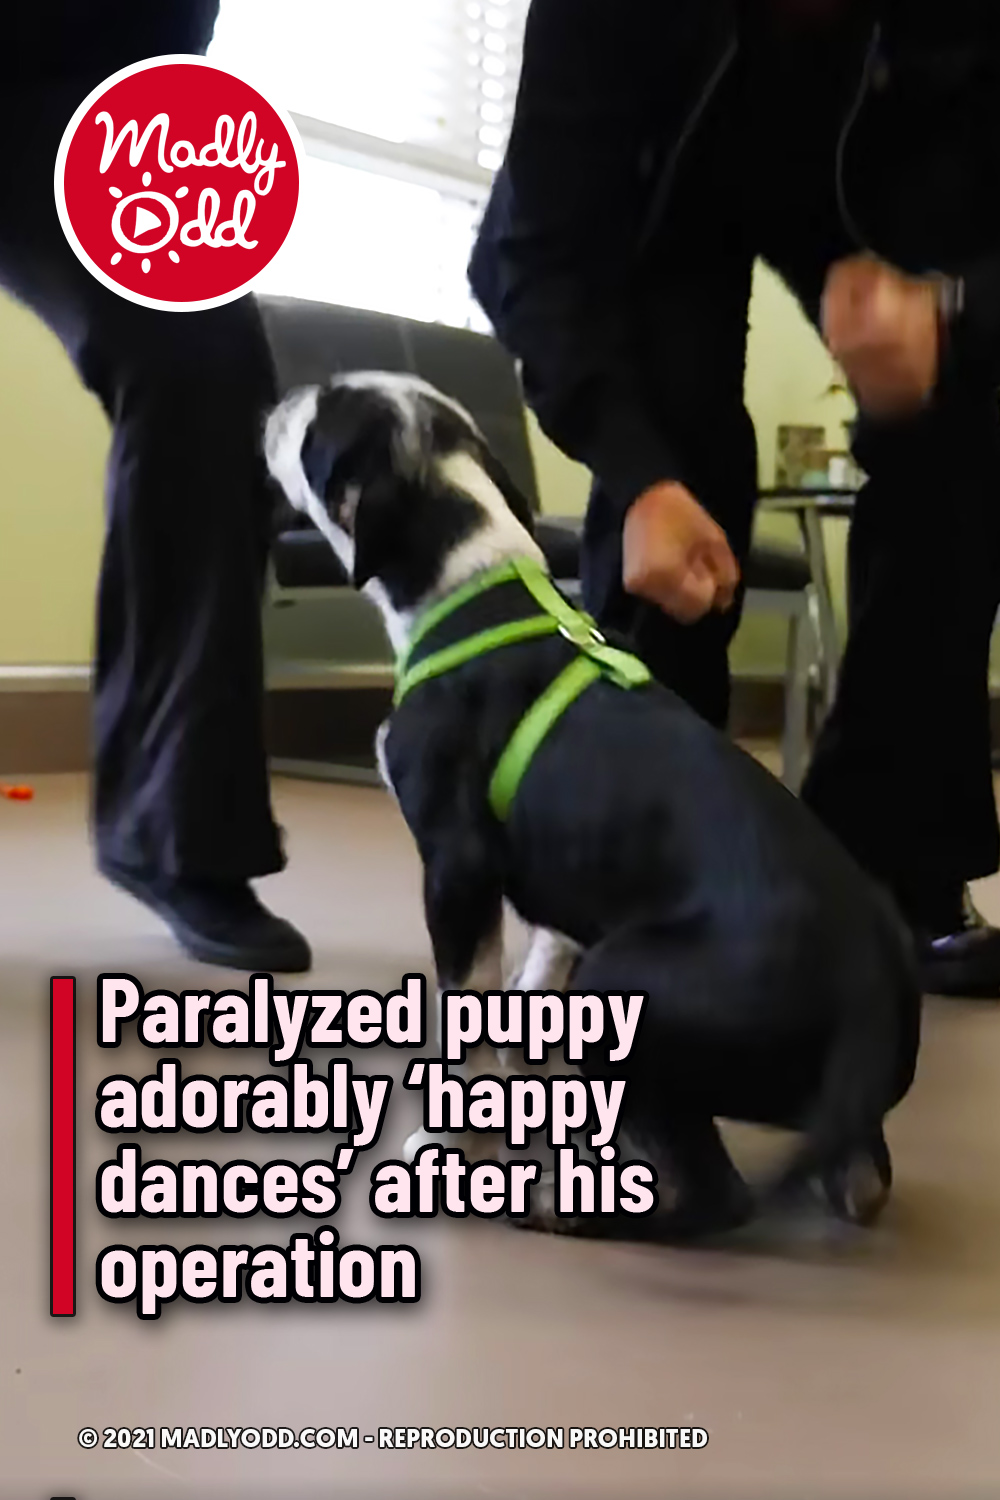 Paralyzed puppy adorably ‘happy dances’ after his operation